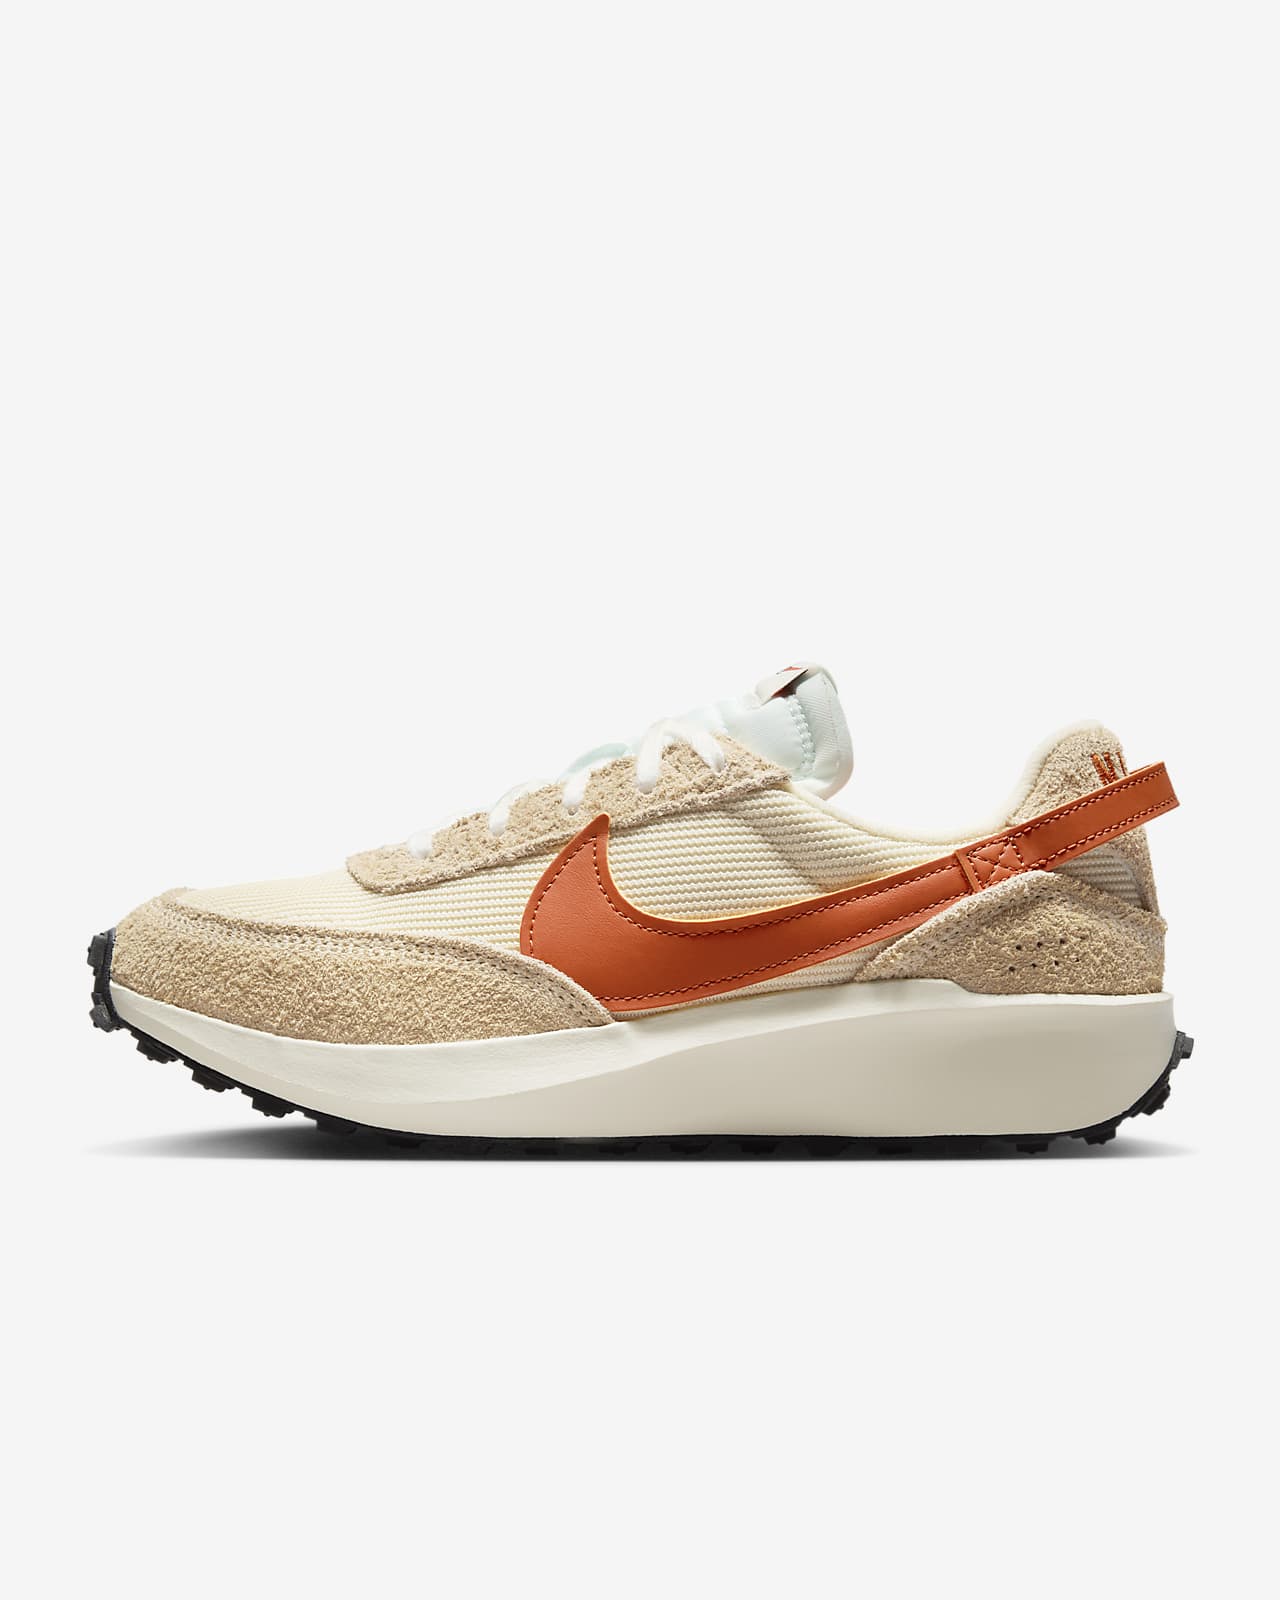 https://static.nike.com/a/images/t_PDP_1280_v1/f_auto,q_auto:eco/573841e7-c1ab-455e-b7e9-b9aecbfeb9c6/waffle-debut-vintage-womens-shoes-rfRkv2.png